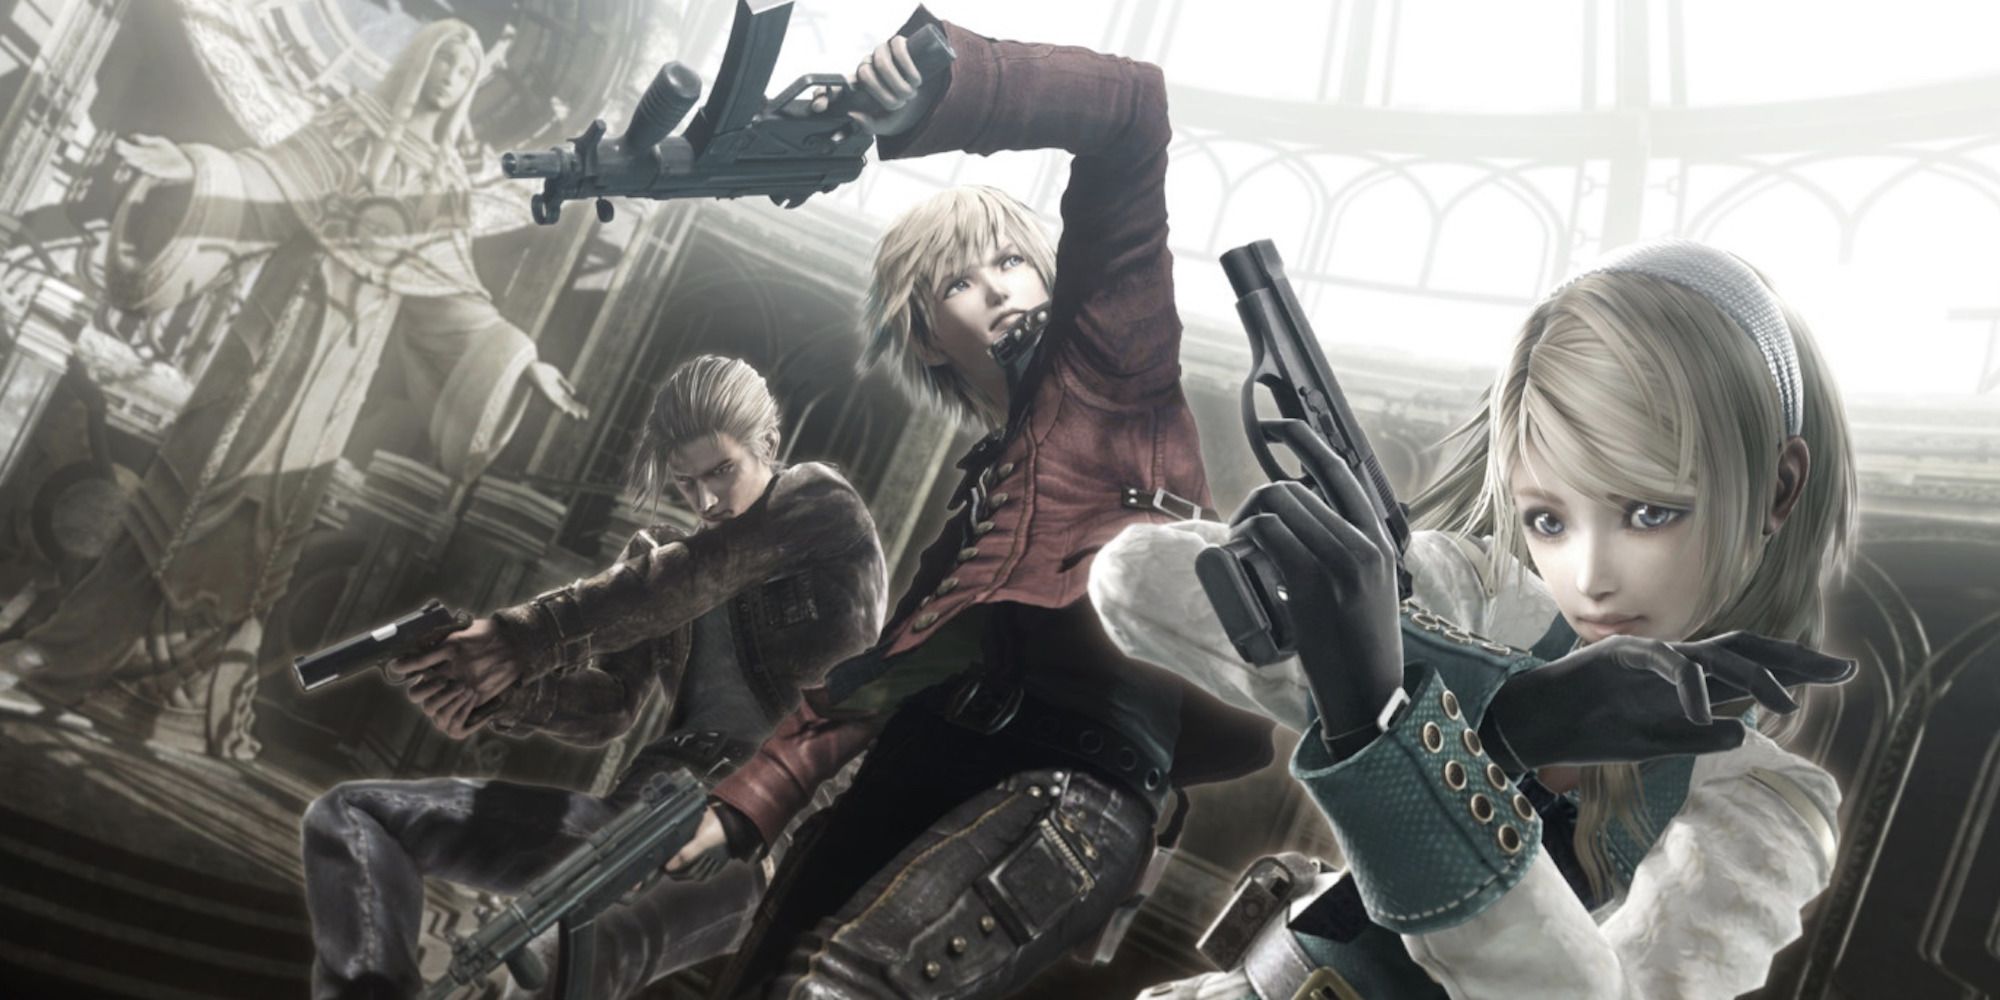 Promo art featuring characters in Resonance Of Fate